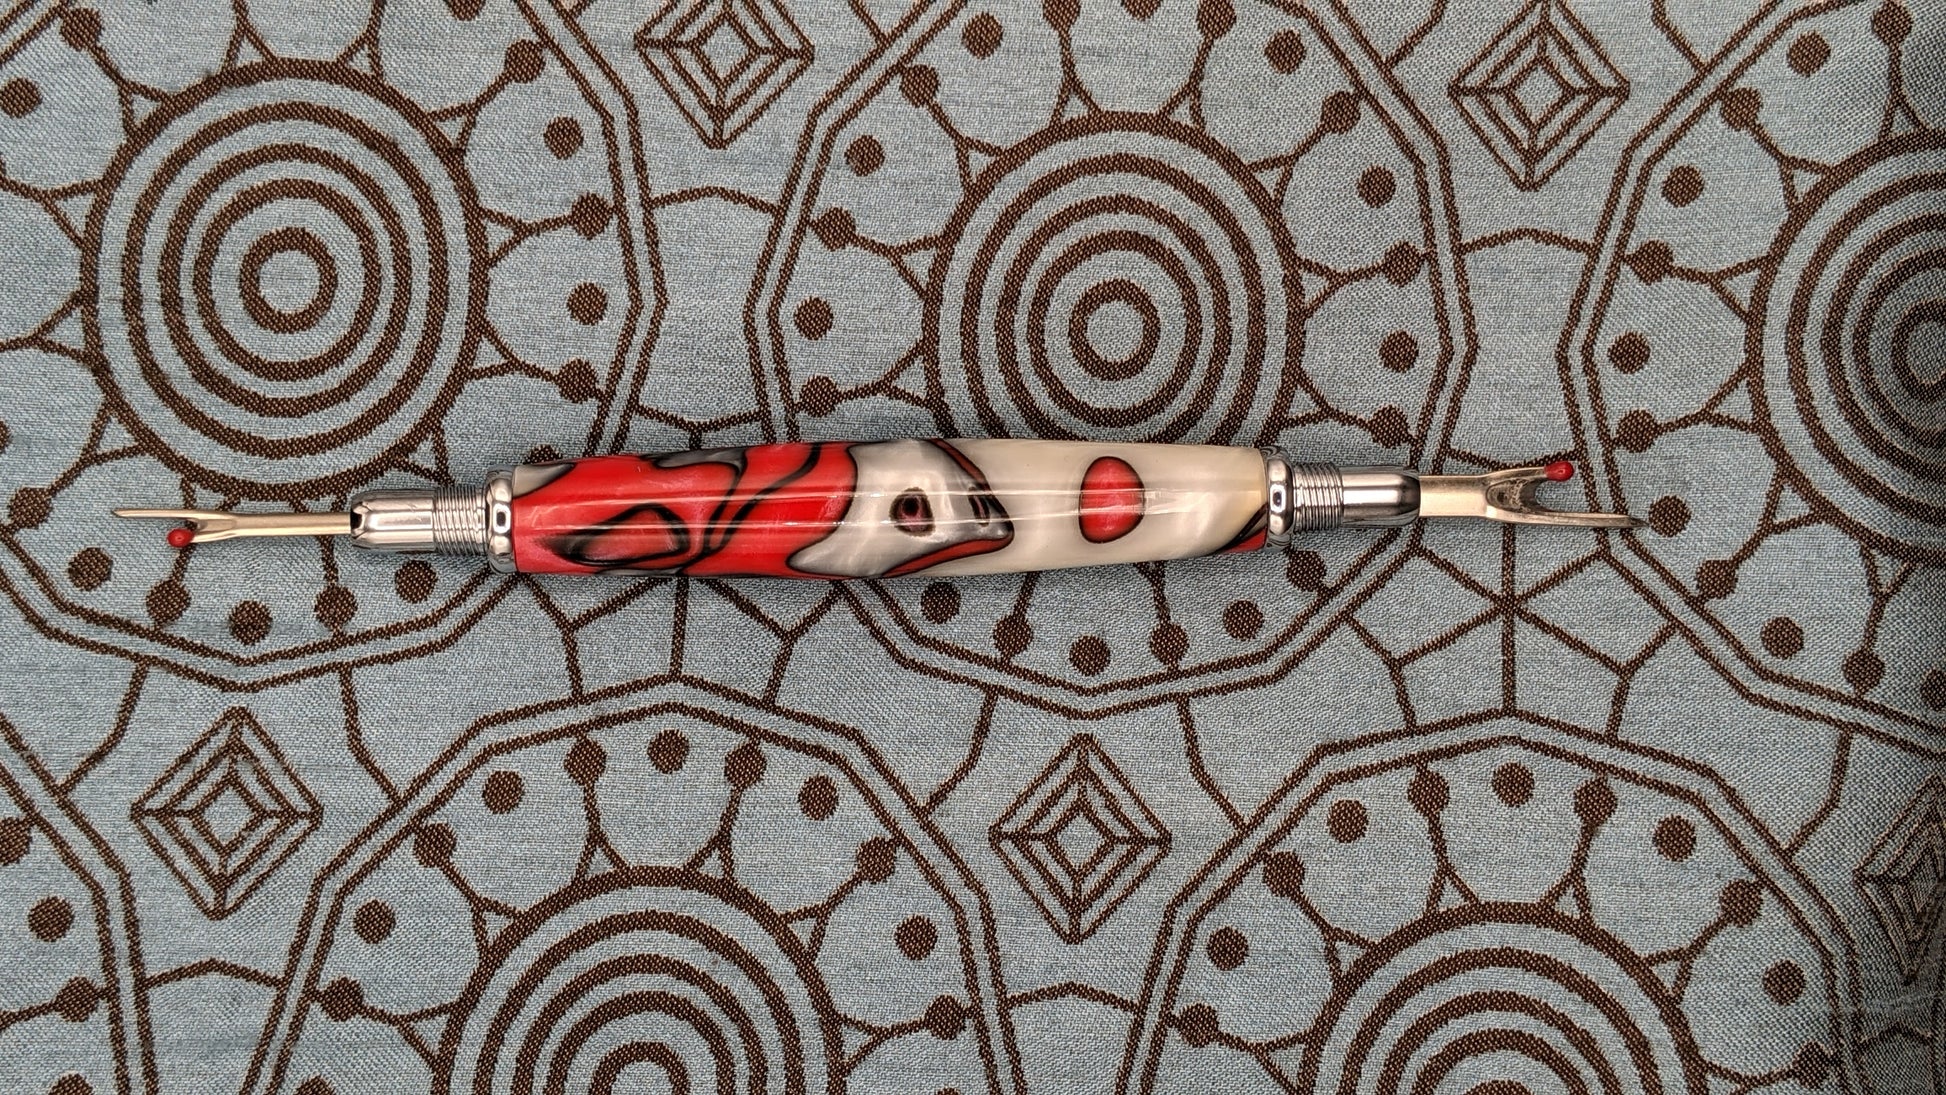 A Gold Plated Double Ended Seam Ripper With Emeri Wood Handle